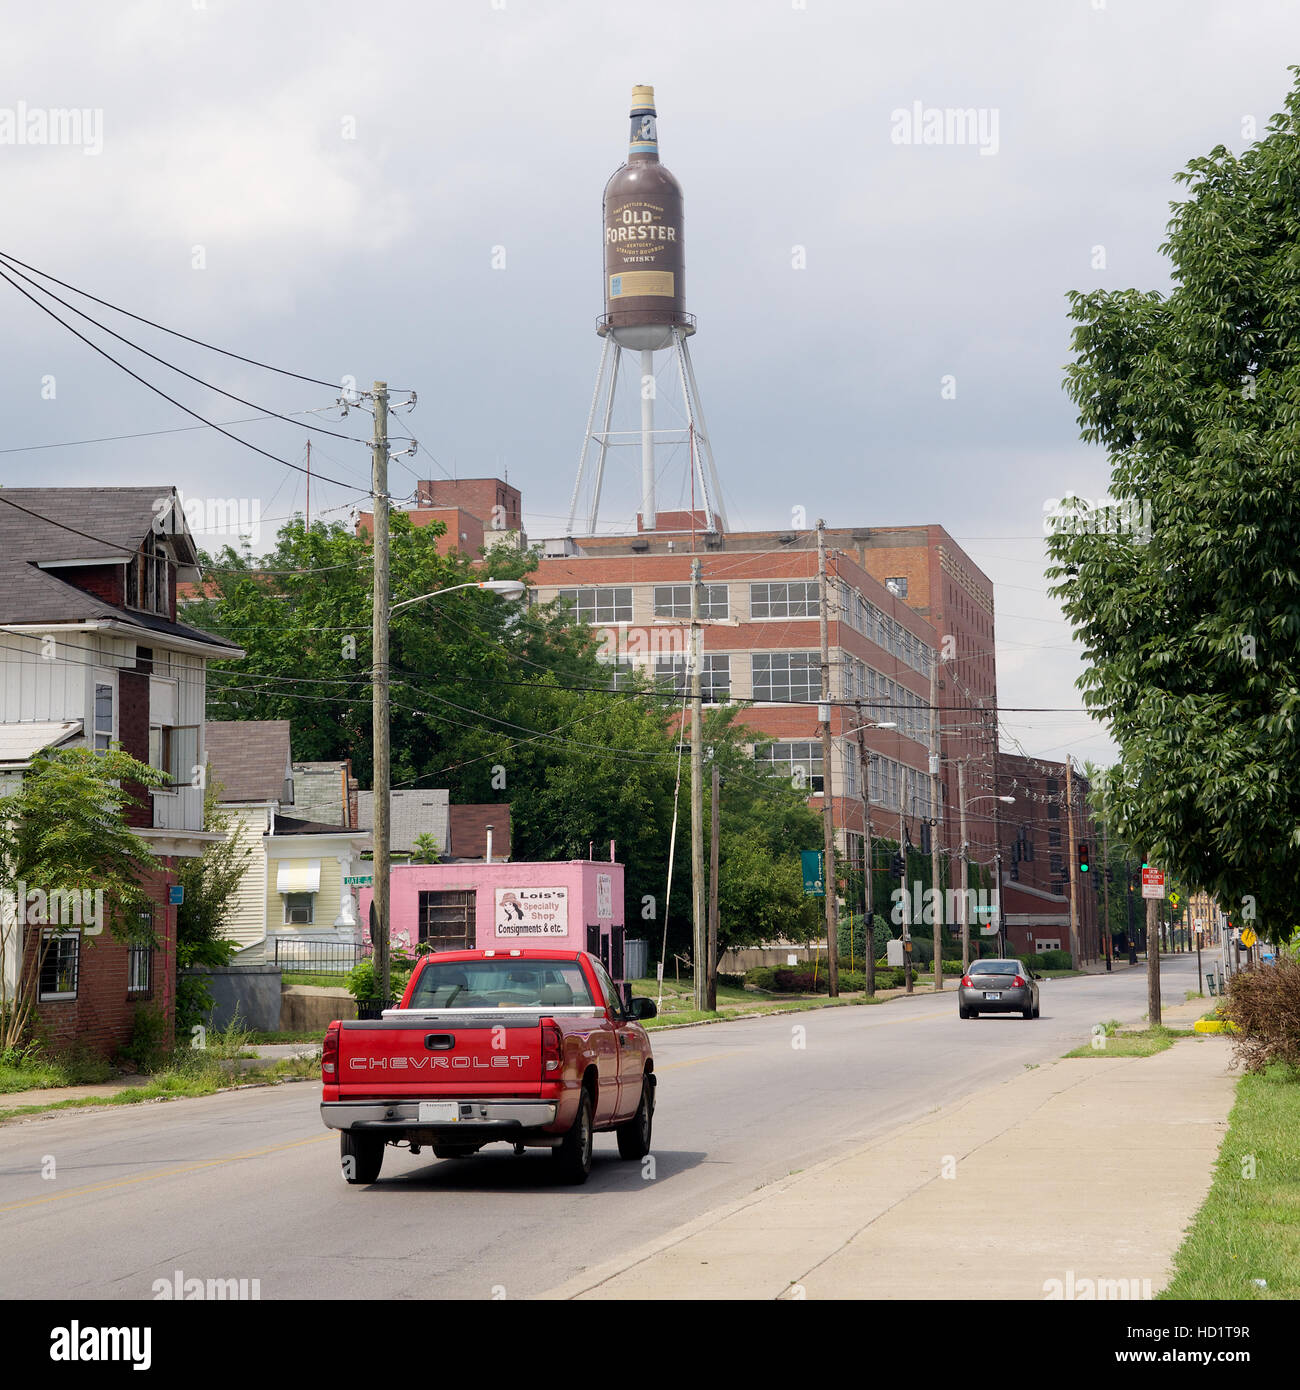 Worlds largest Whiskey bottle water tower in Louisville, Kentucky, USA  Stock Photo - Alamy